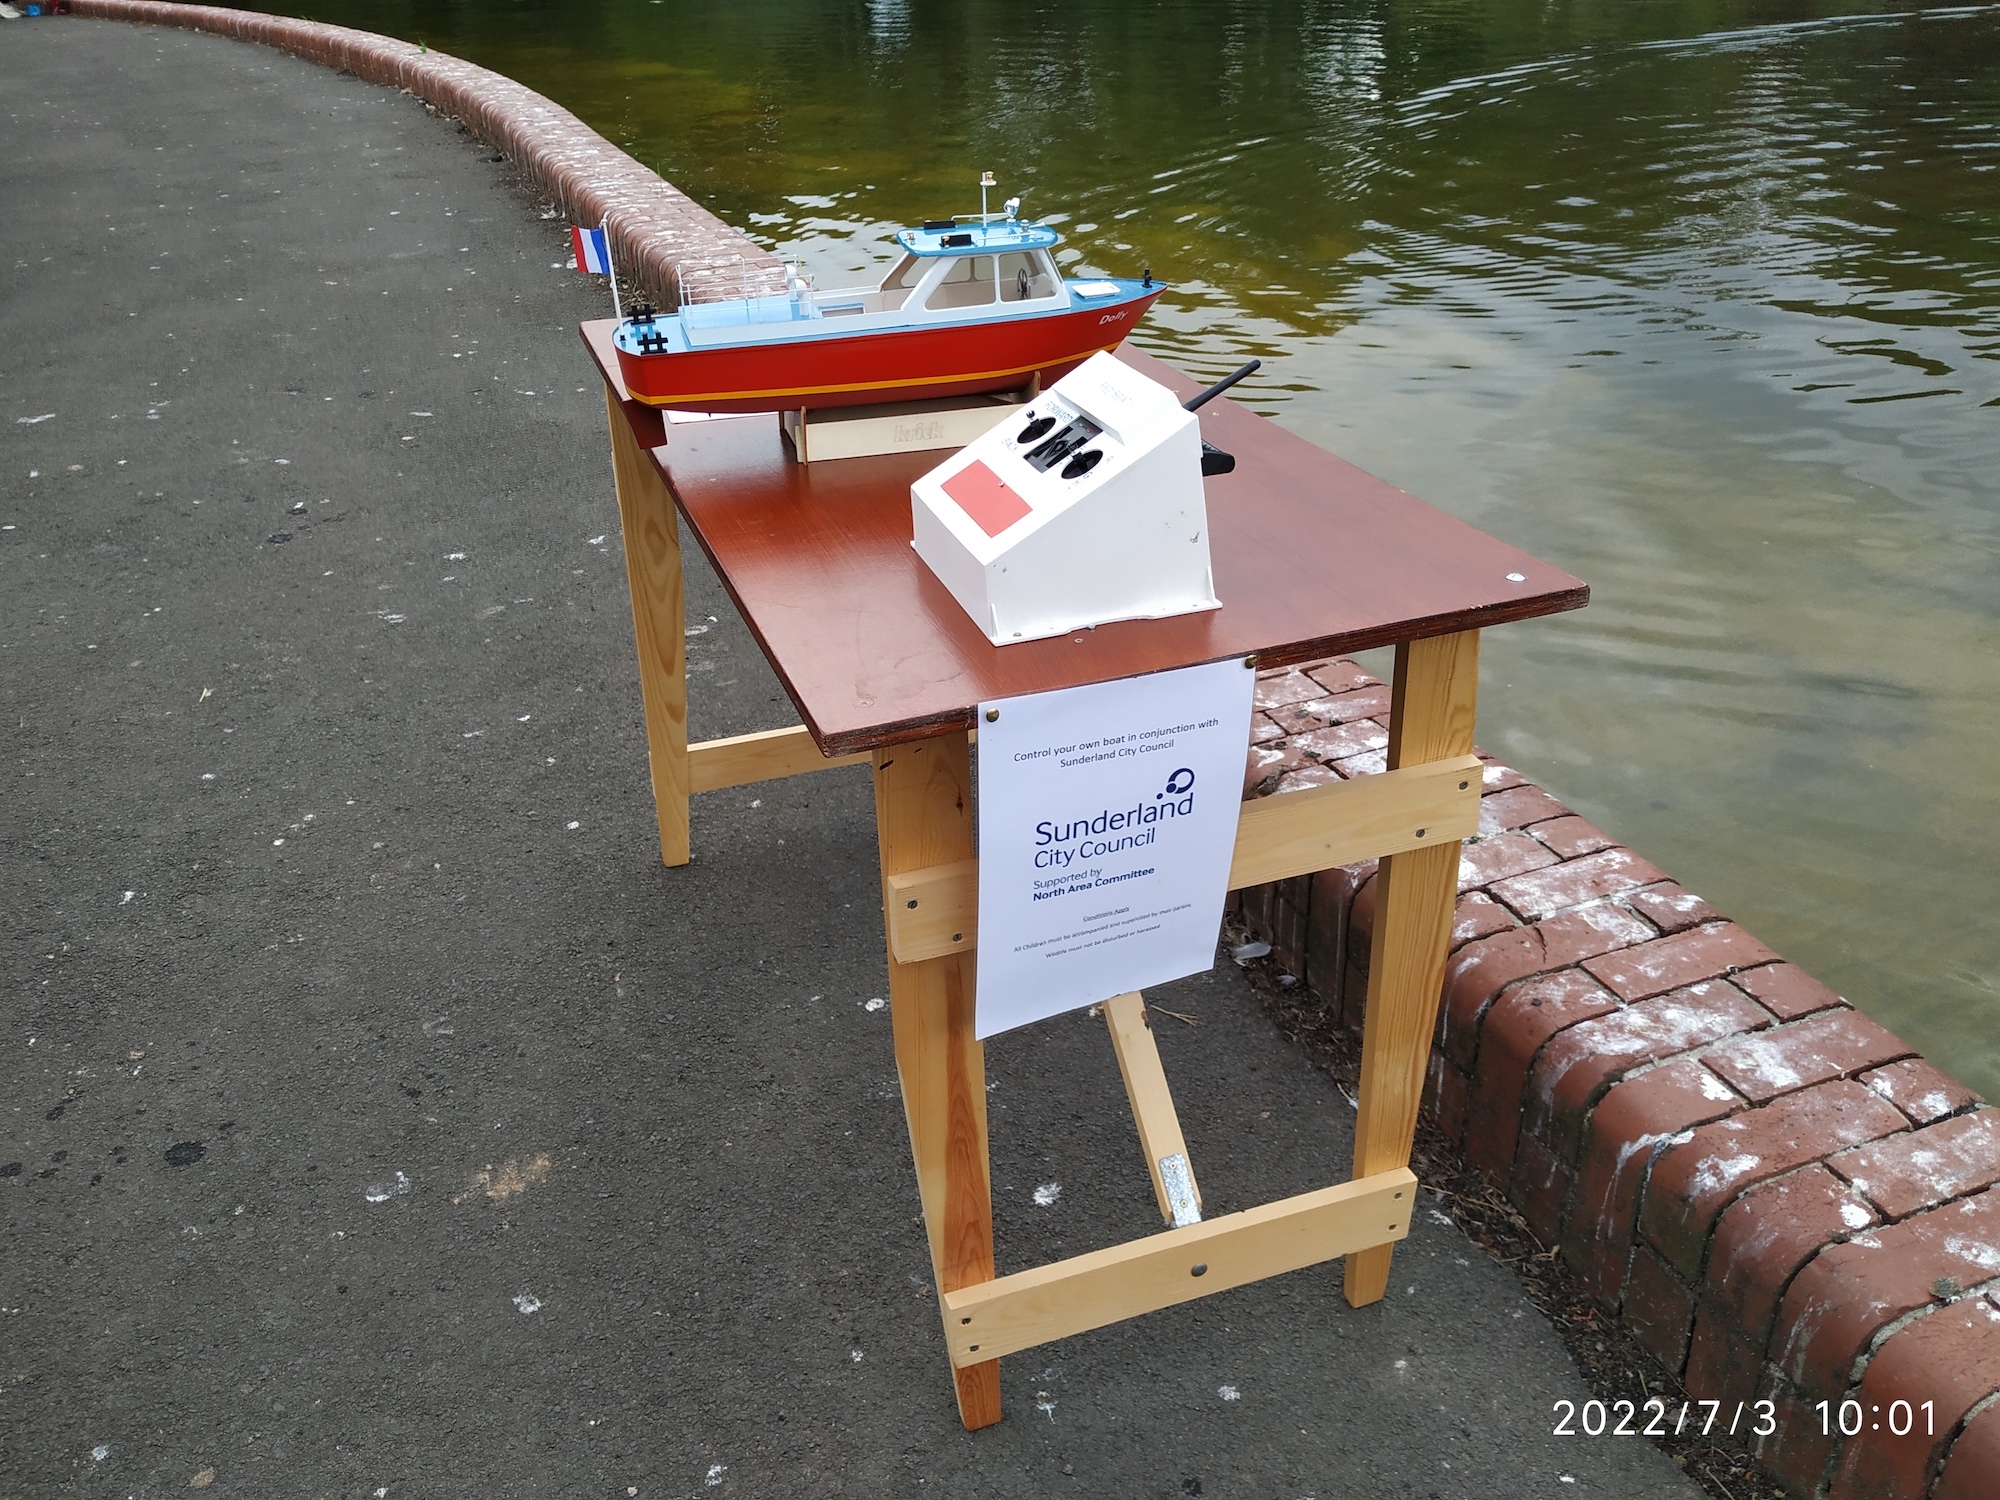 picture of a table beside the boating lake with one of the constructed model boats ready for use.